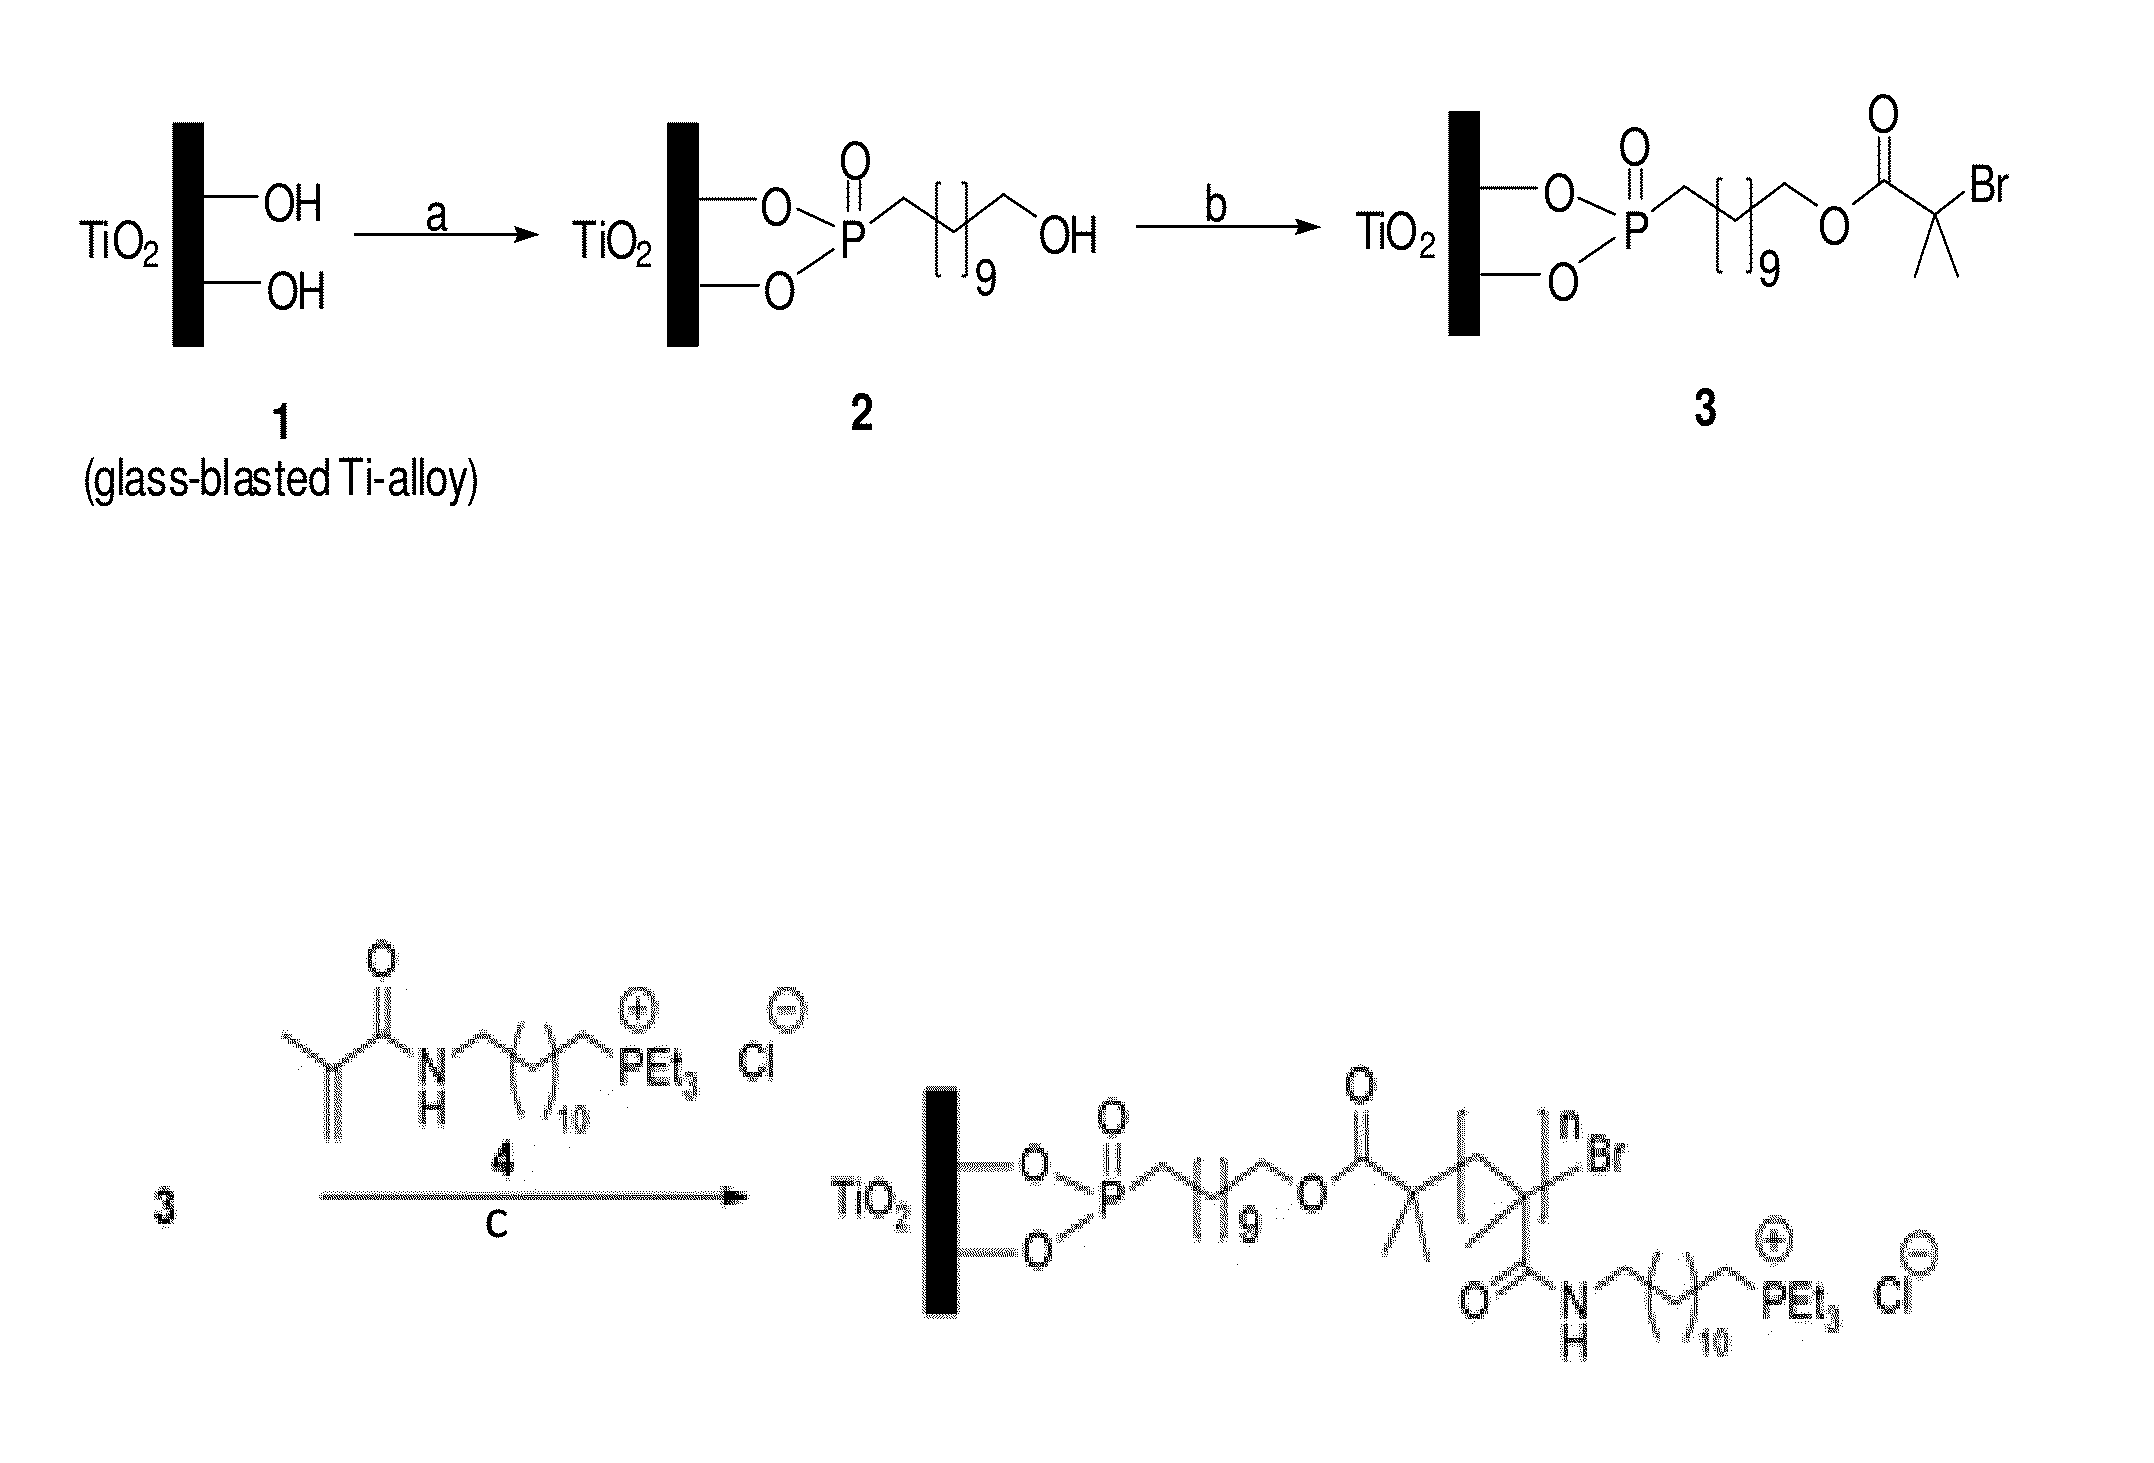 Quaternary Phosphonium Coated Surfaces and Methods of Making the Same